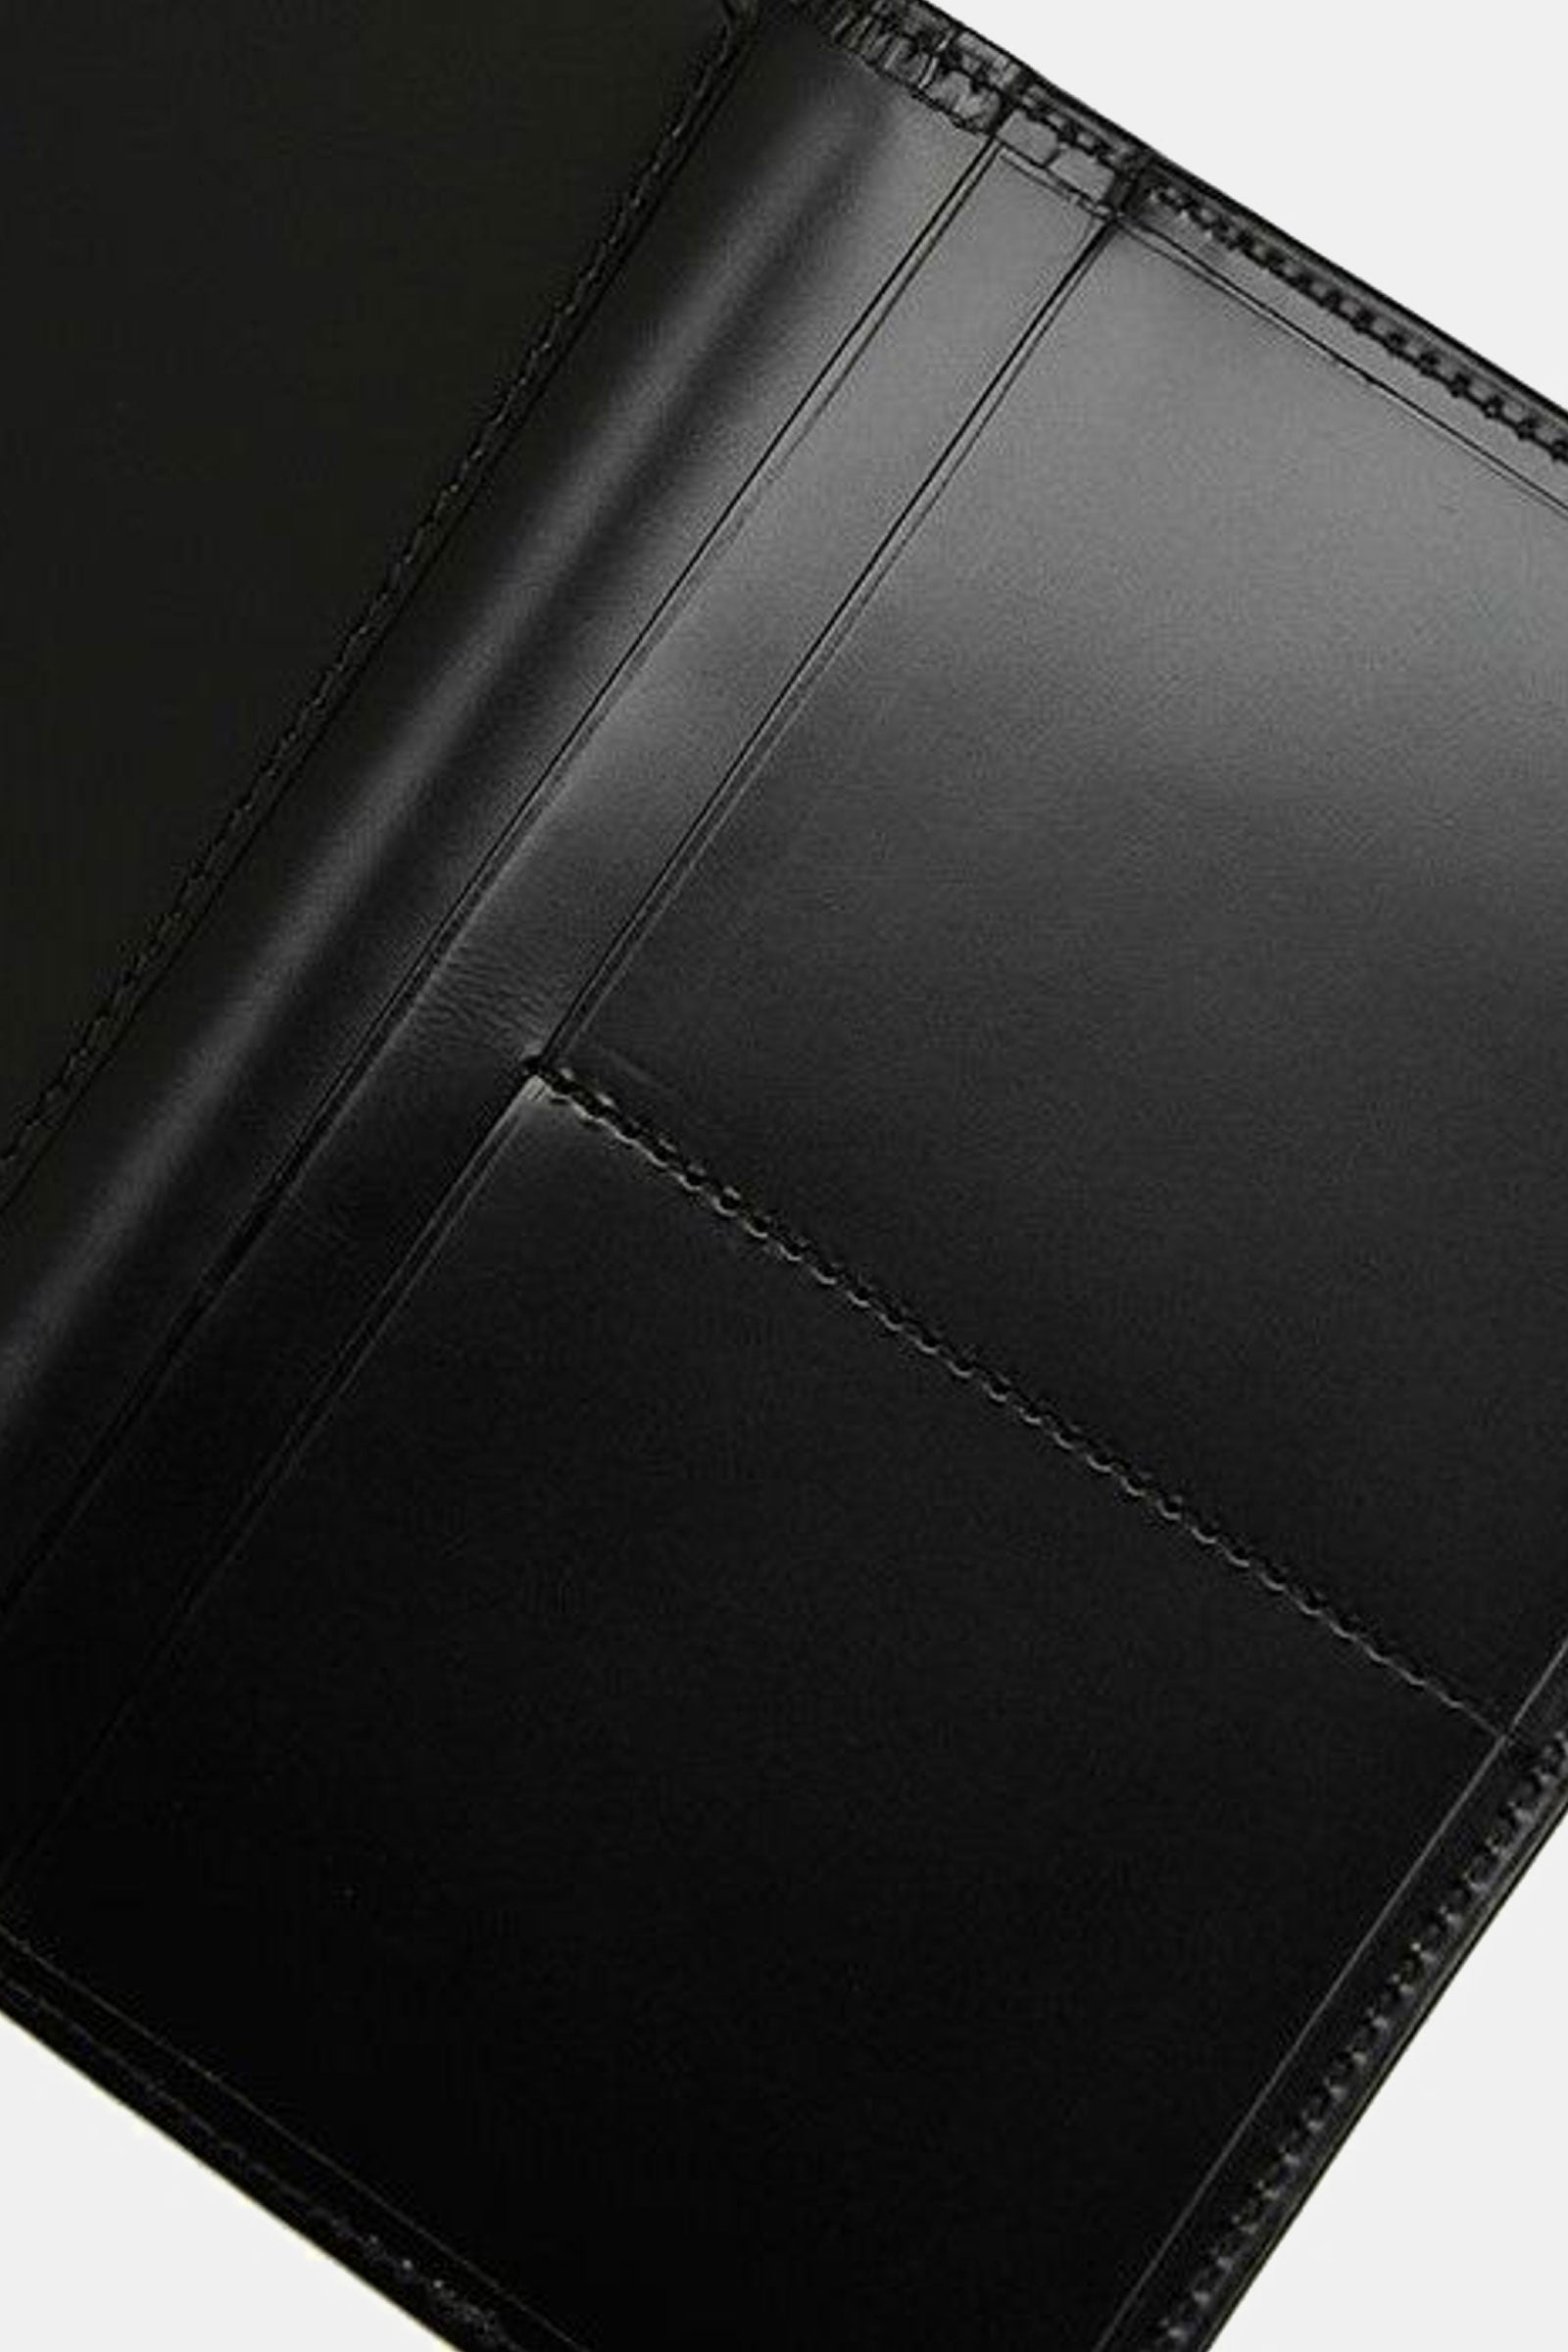 PS LEATHER WALLET PASSPORT CASE